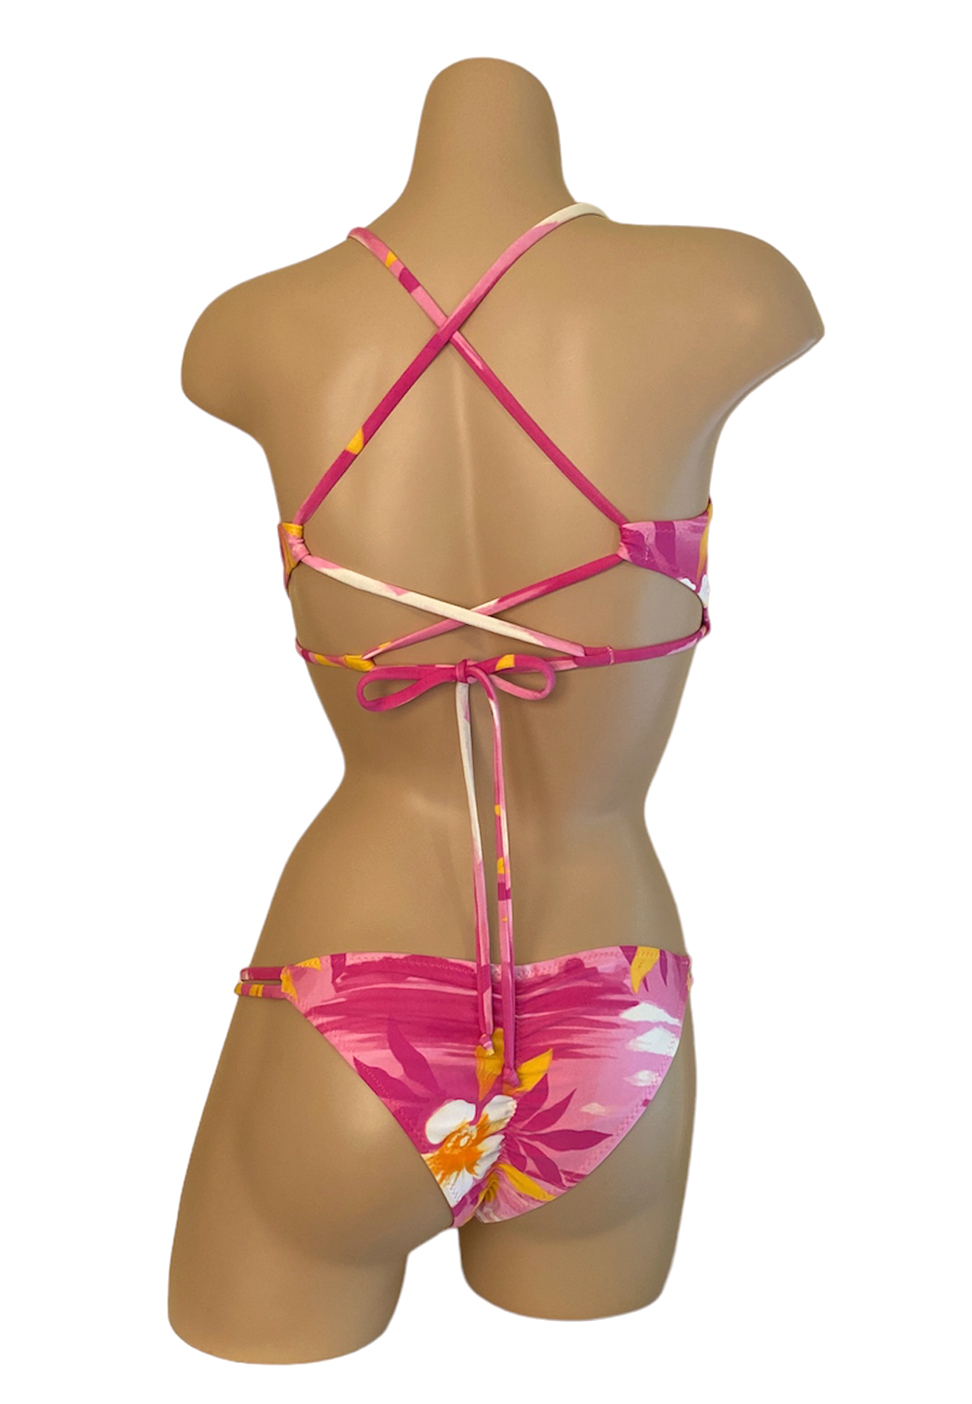 Low waist, double side strap with side beads, ruched back bikini bottoms and peek-a-boo cross back, adjustable bikini top in Tropical Barbie print back view